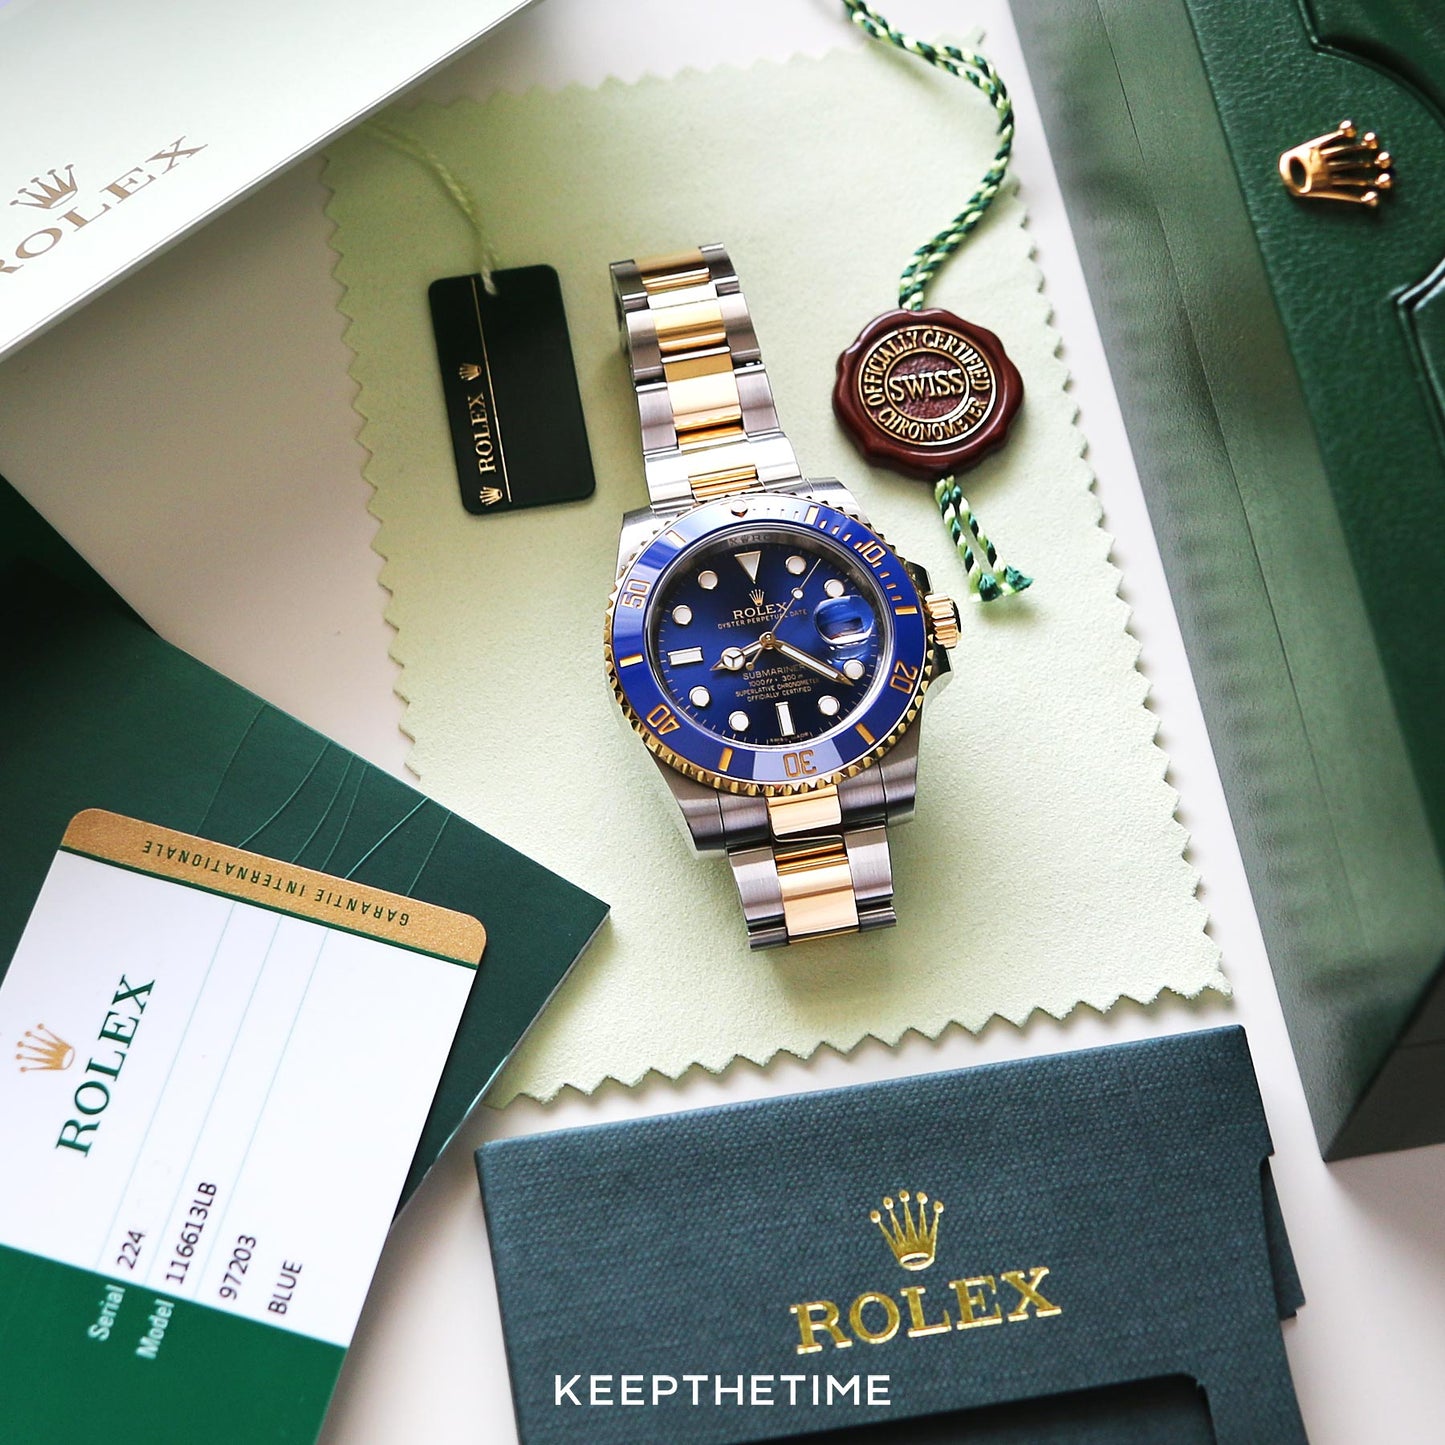 Rolex Watches Submariner Automatic Silver Gold Blue Dial Metal Men's Watch for Man RLX-BLUE-SG Dual Tone